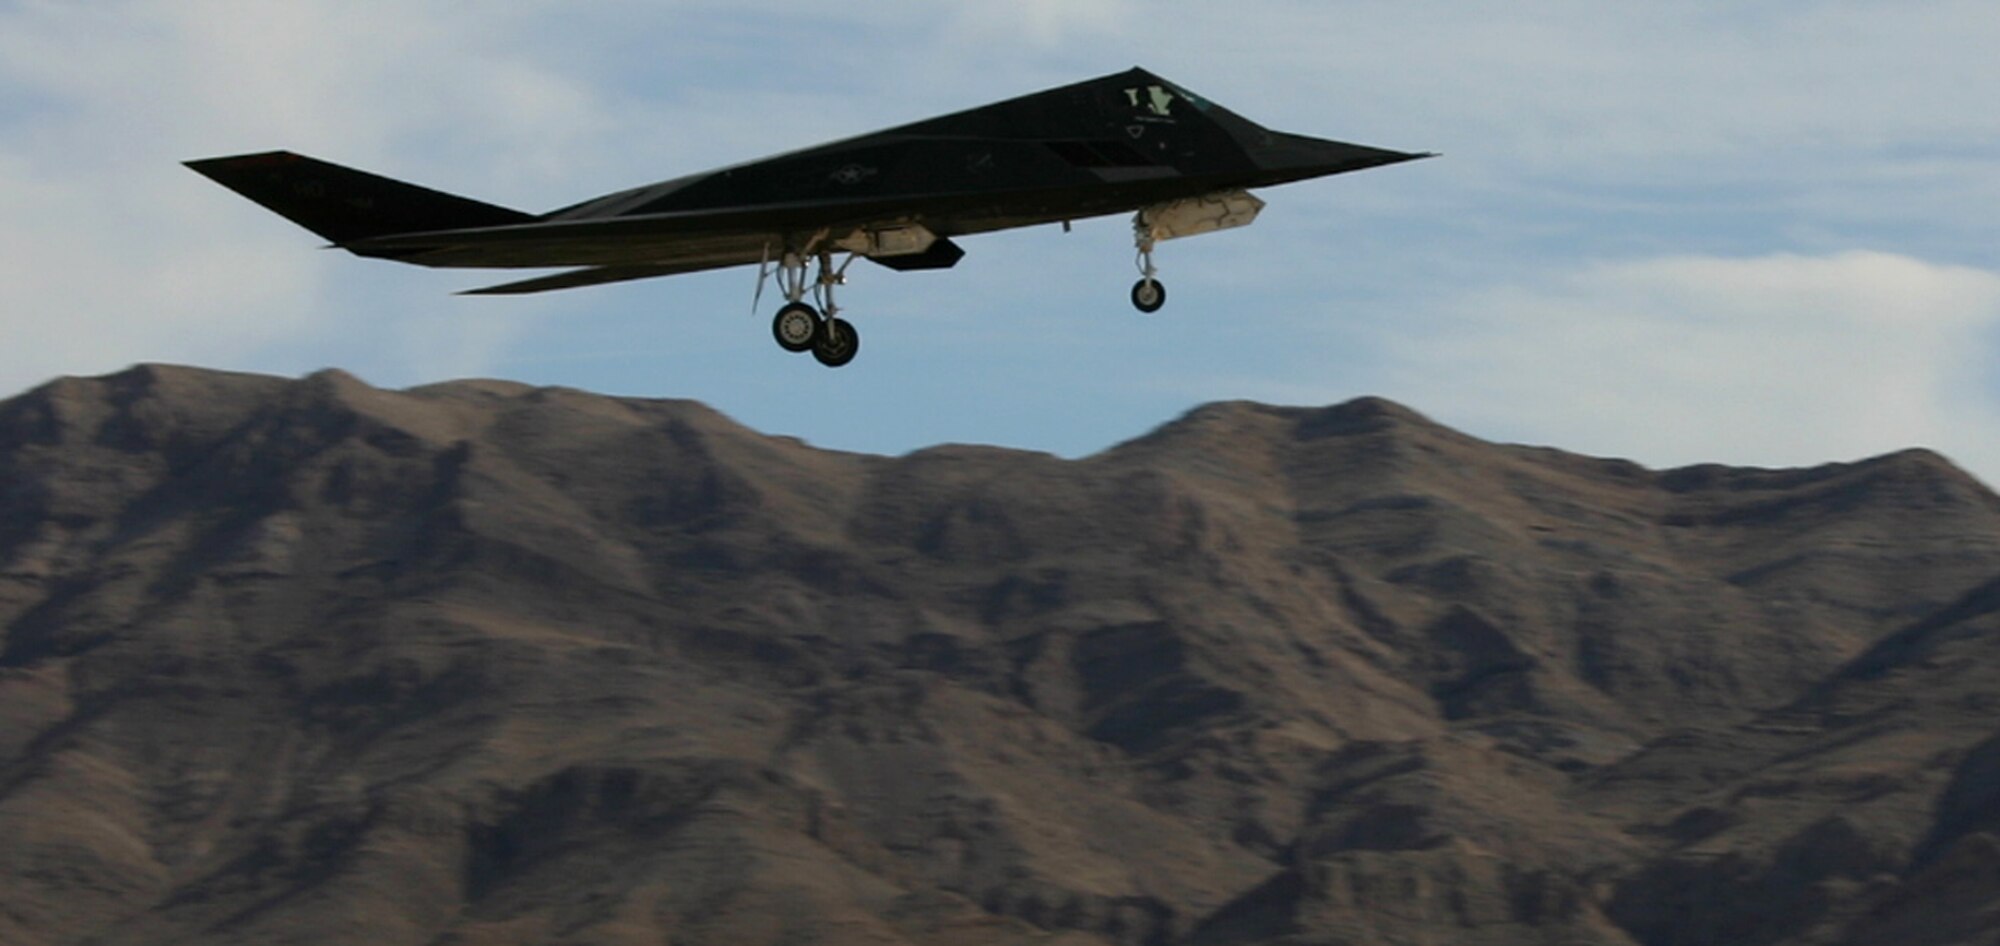 An F-117 Nighthawk stealth fighter lands at Nellis Air Force Base, Nev., after a Red Flag mission Feb. 12, 2007. All three of the Air Force's stealth aircraft models -- the B-2, F-117 and F-22 -- are taking part in Red Flag, which sharpens aircrews’ war-fighting skills in realistic combat situations. Crews are flying missions during the day and night to the nearby Nevada Test and Training Range where they take part in highly realistic aerial combat. The U.S. Air Force and Navy, along with Australia and the United Kingdom, are participating in February's Red Flag.  (U.S. Air Force photo/Mike Estrada)